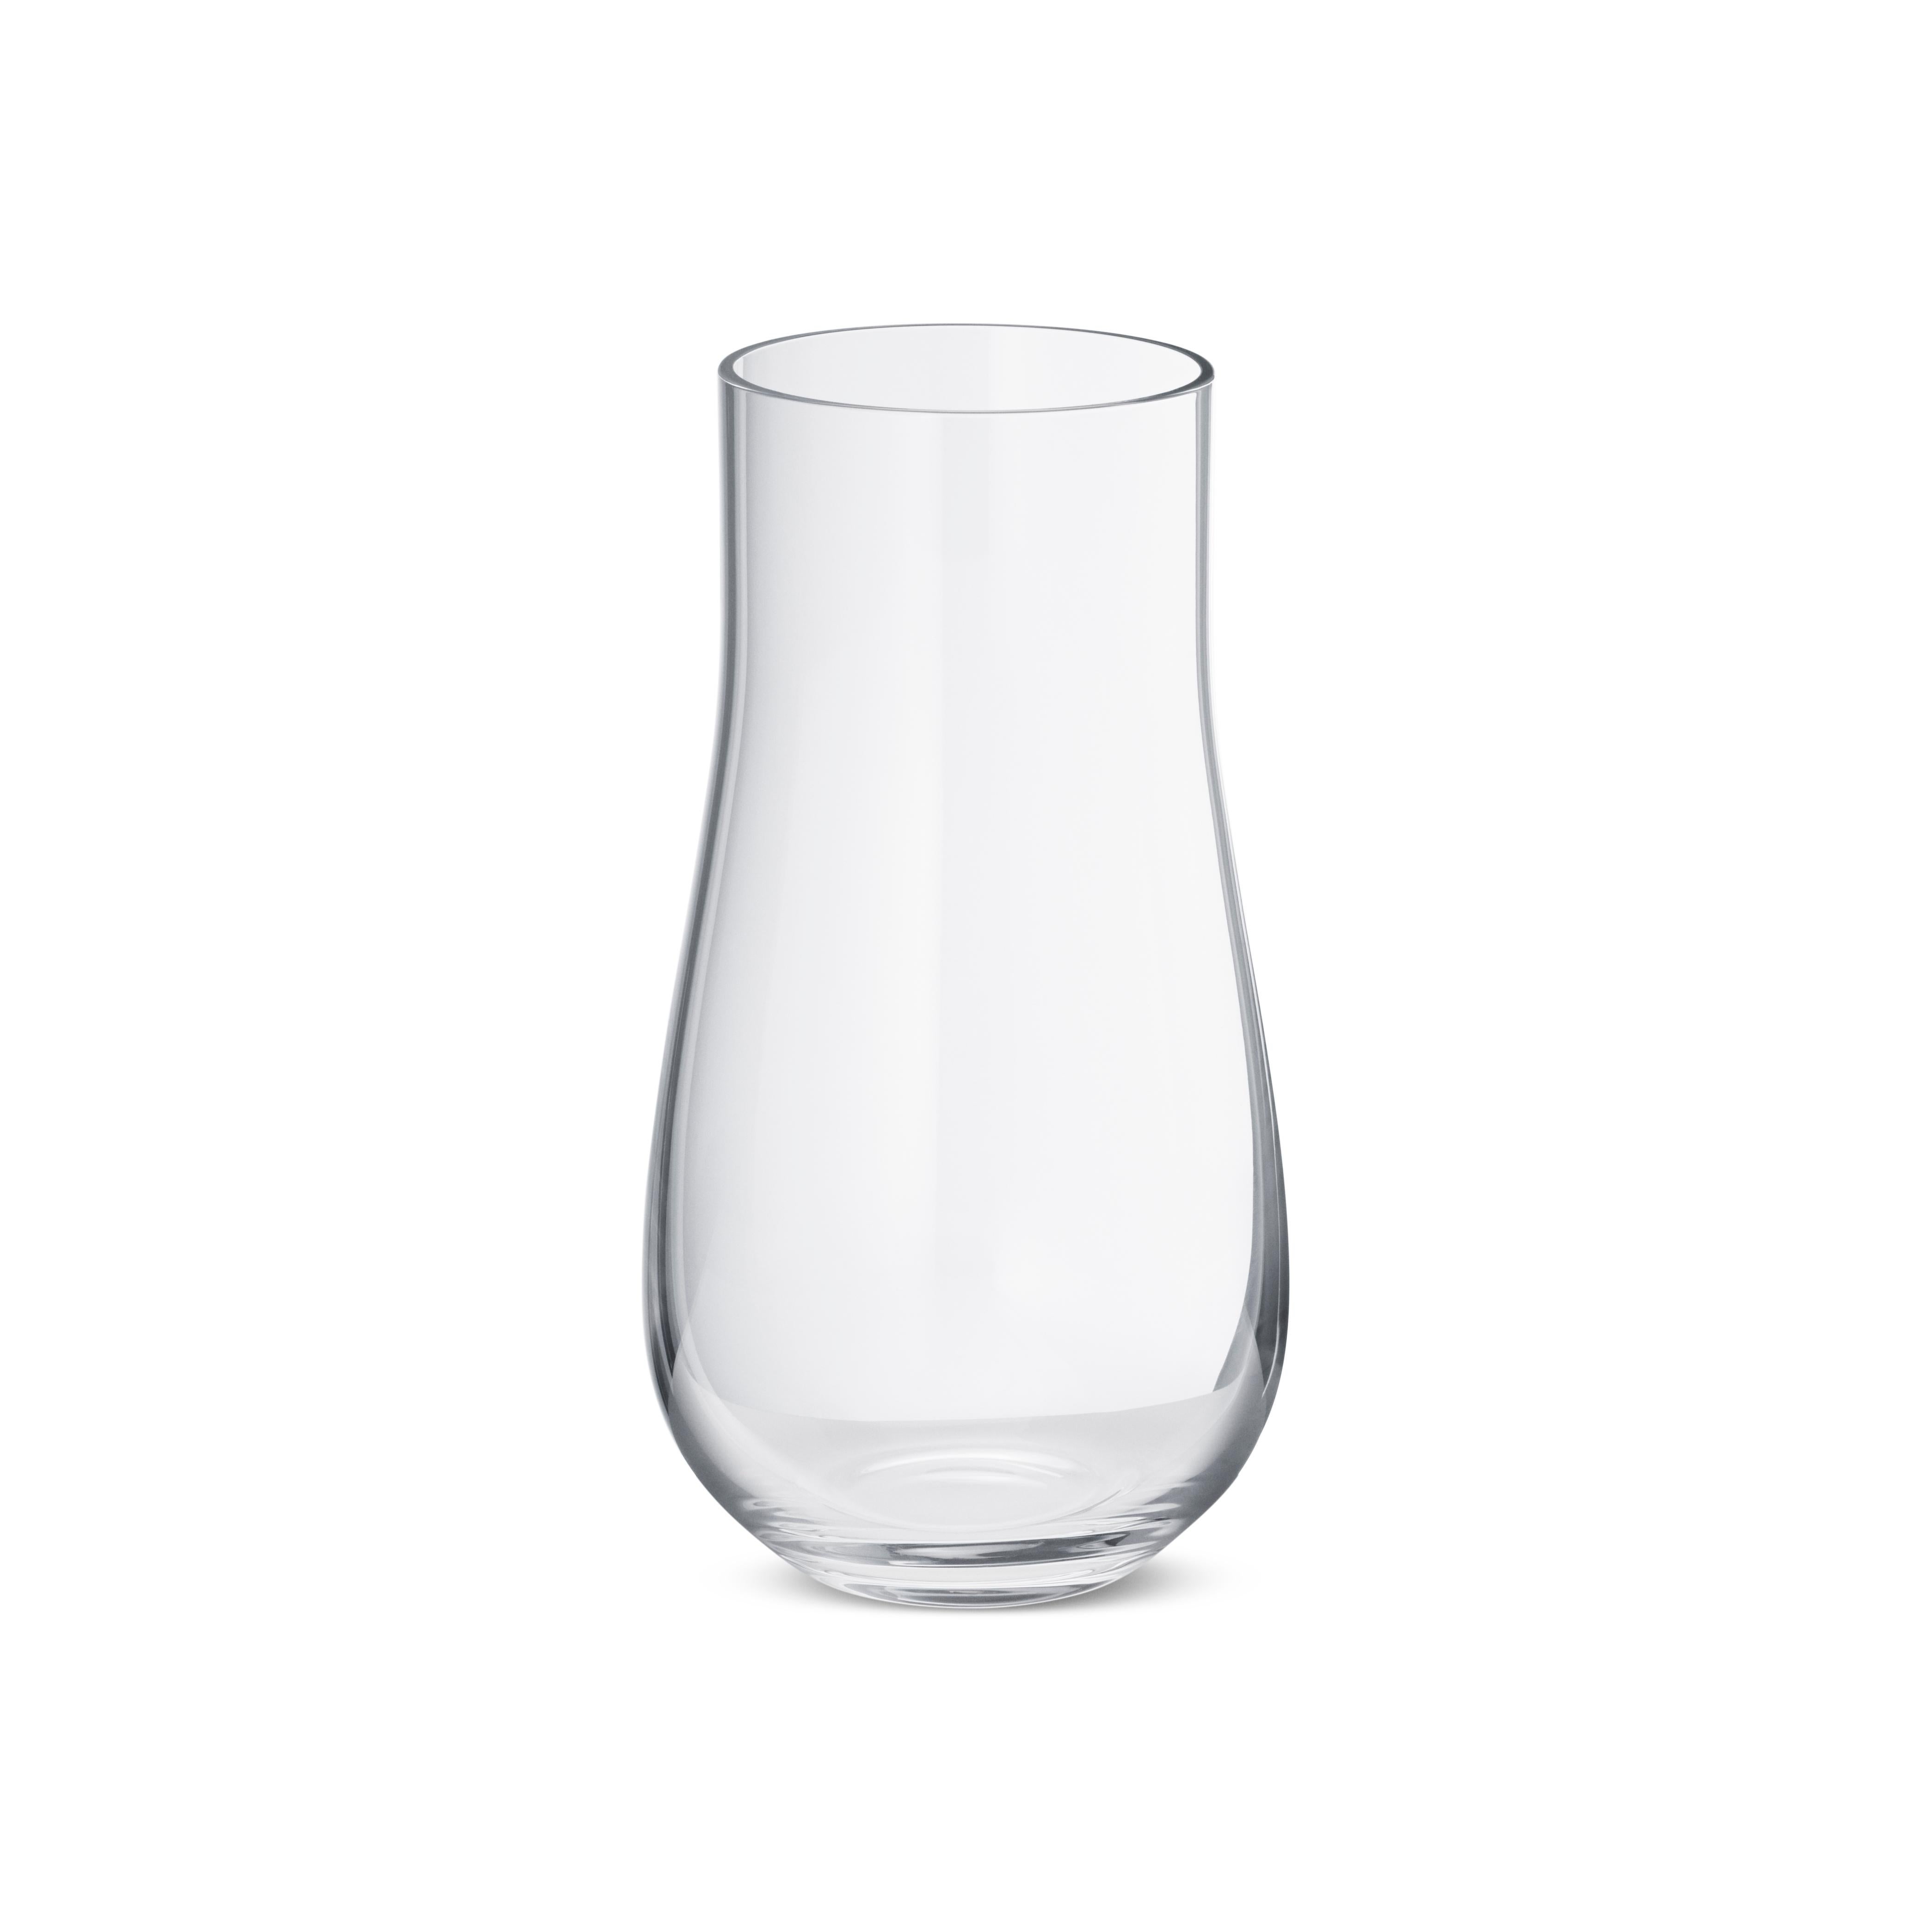 The ergonomic and sculptural shape of these lead-free crystal tall tumblers not only make them a beautiful contemporary addition to the dining table or home bar, they also make the glasses comfortable and easy to hold. Use for long drinks or water